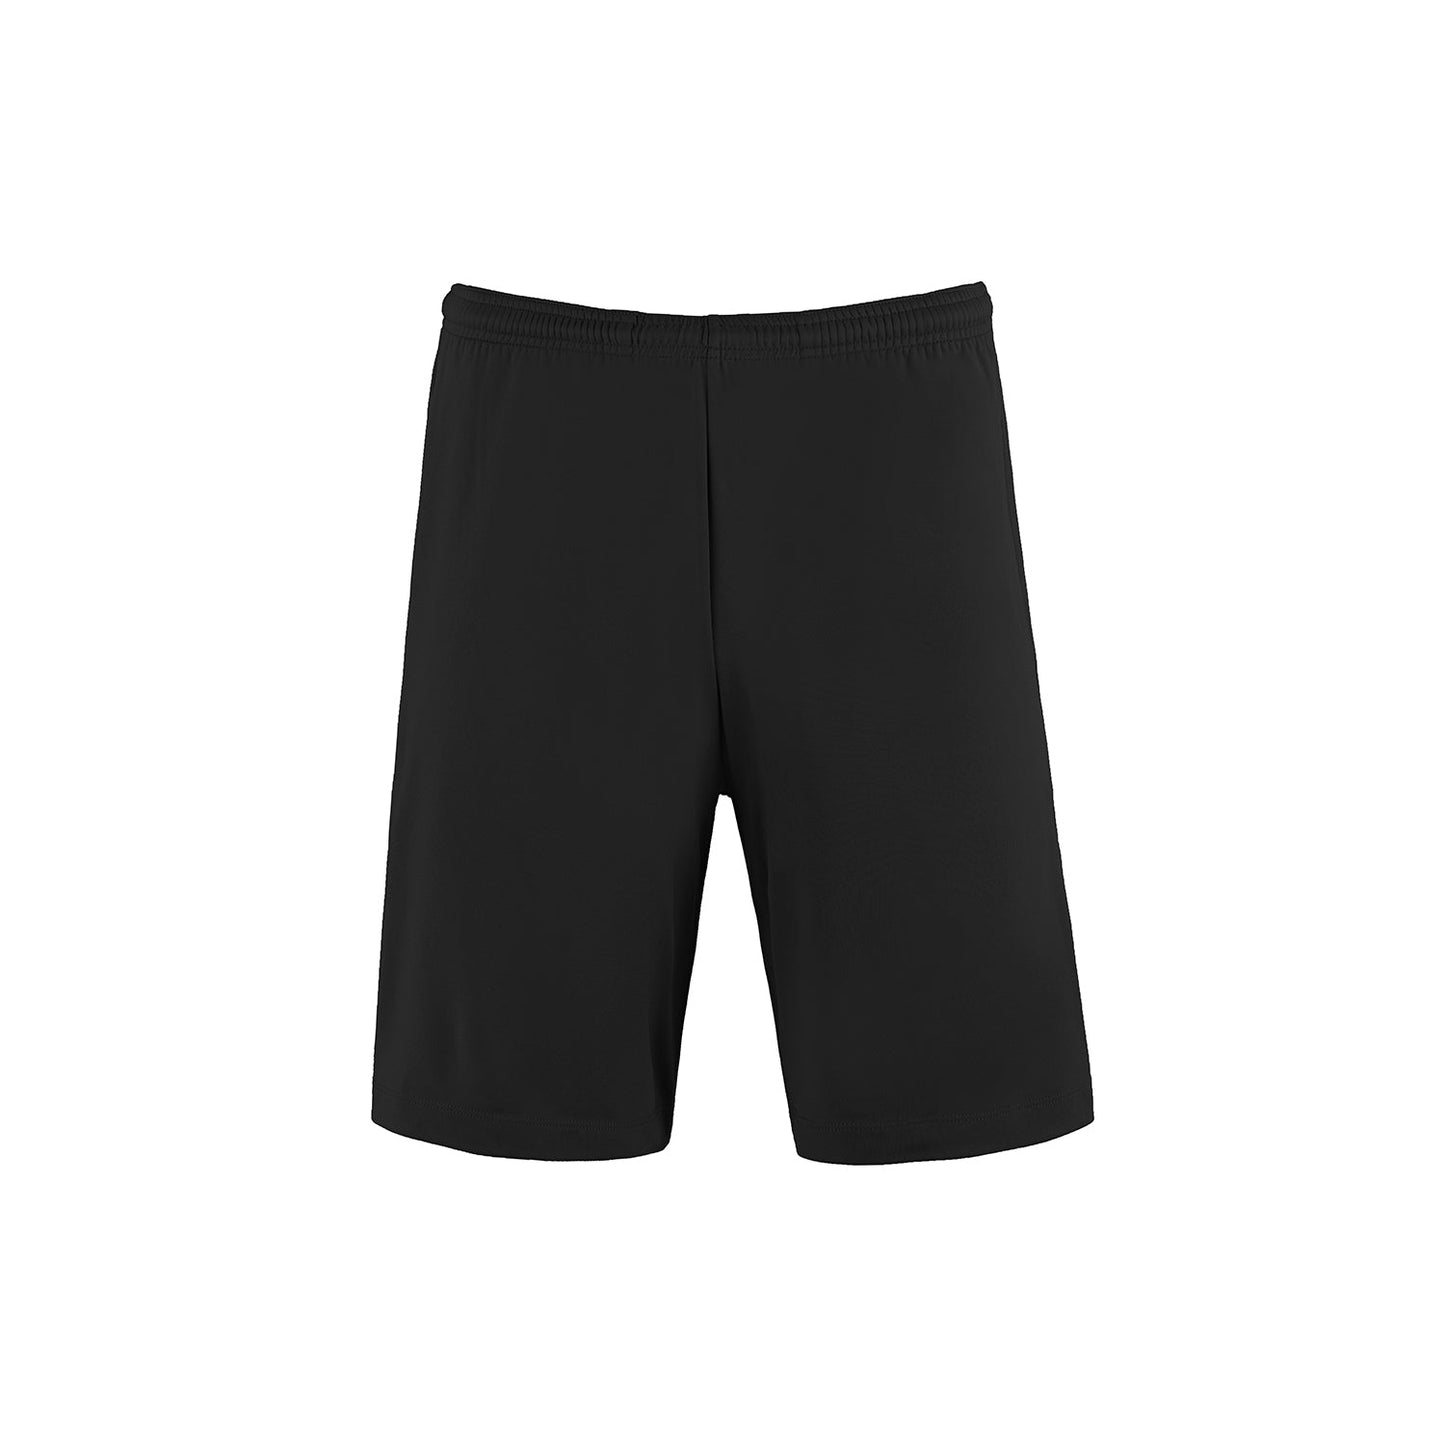 P04475 - Wave - Athletic Short with Pockets - Black / XS